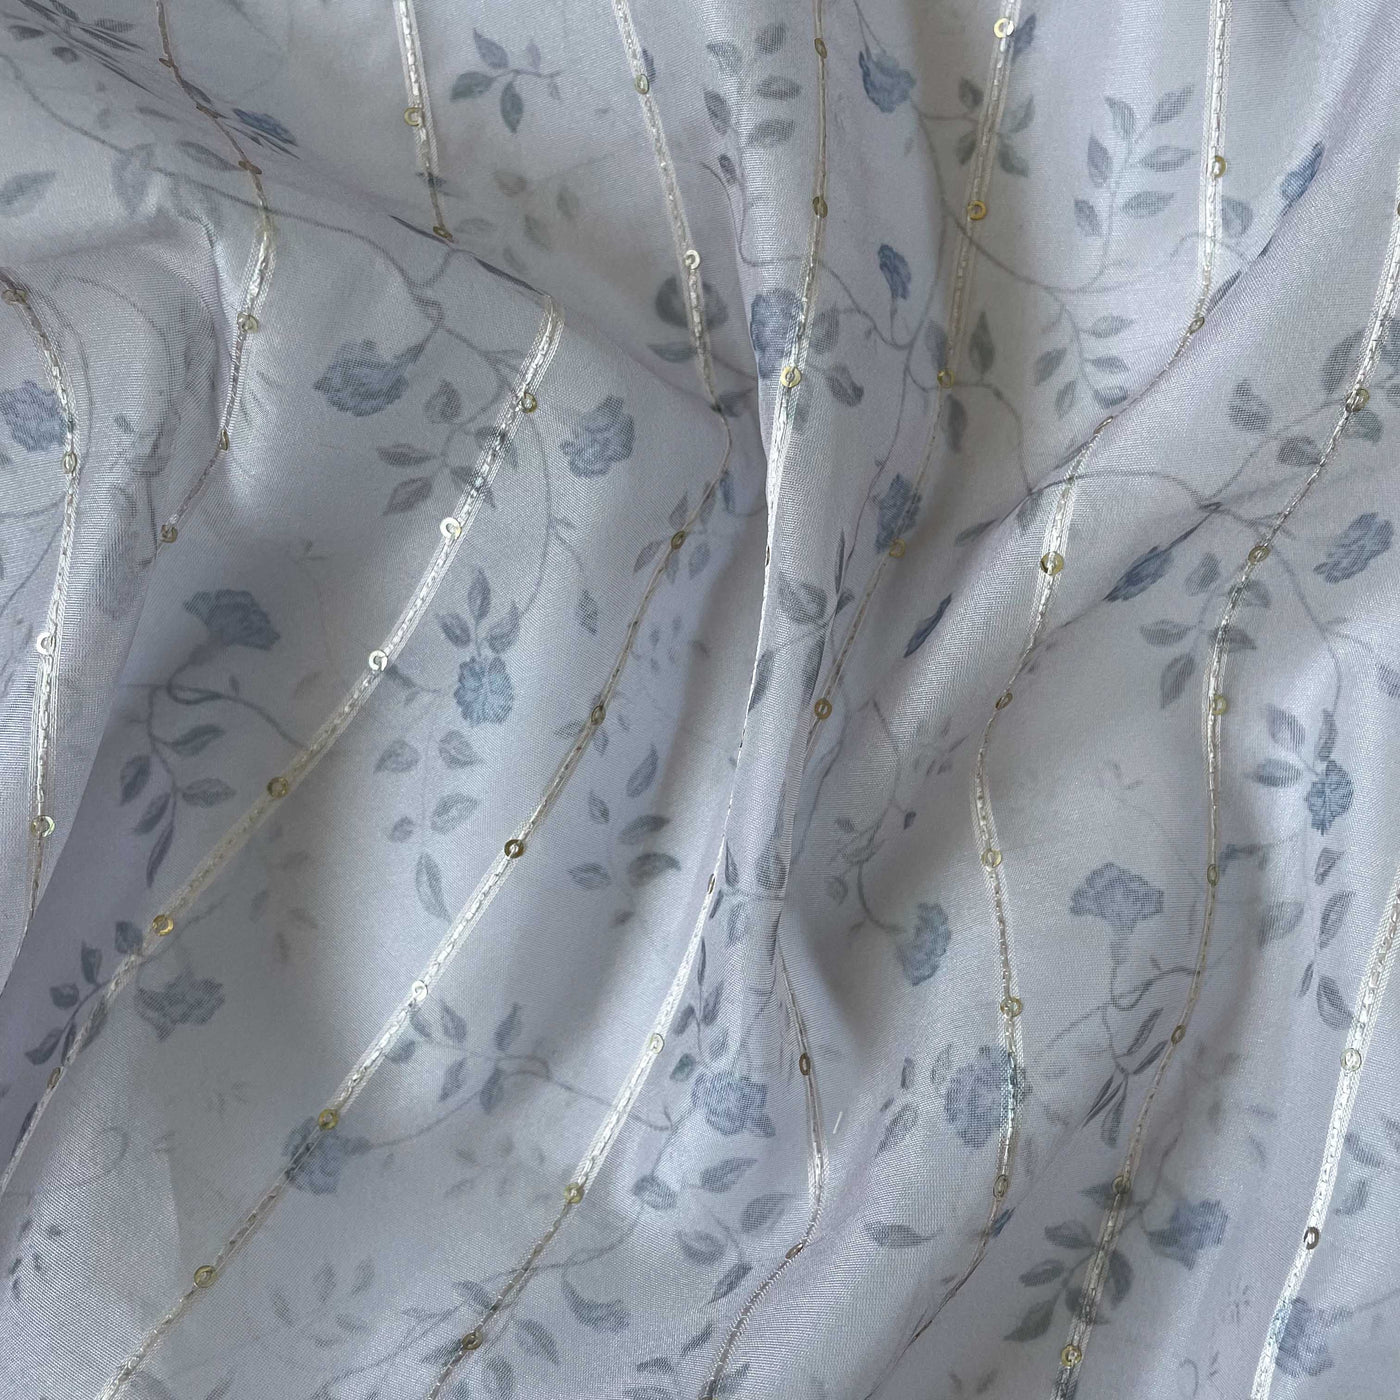 Digital Printed Organza Fabric Fabric Blue & Grey Floral Garden Embroidered Stripes Printed Organza Fabric (Width 60 Inches)